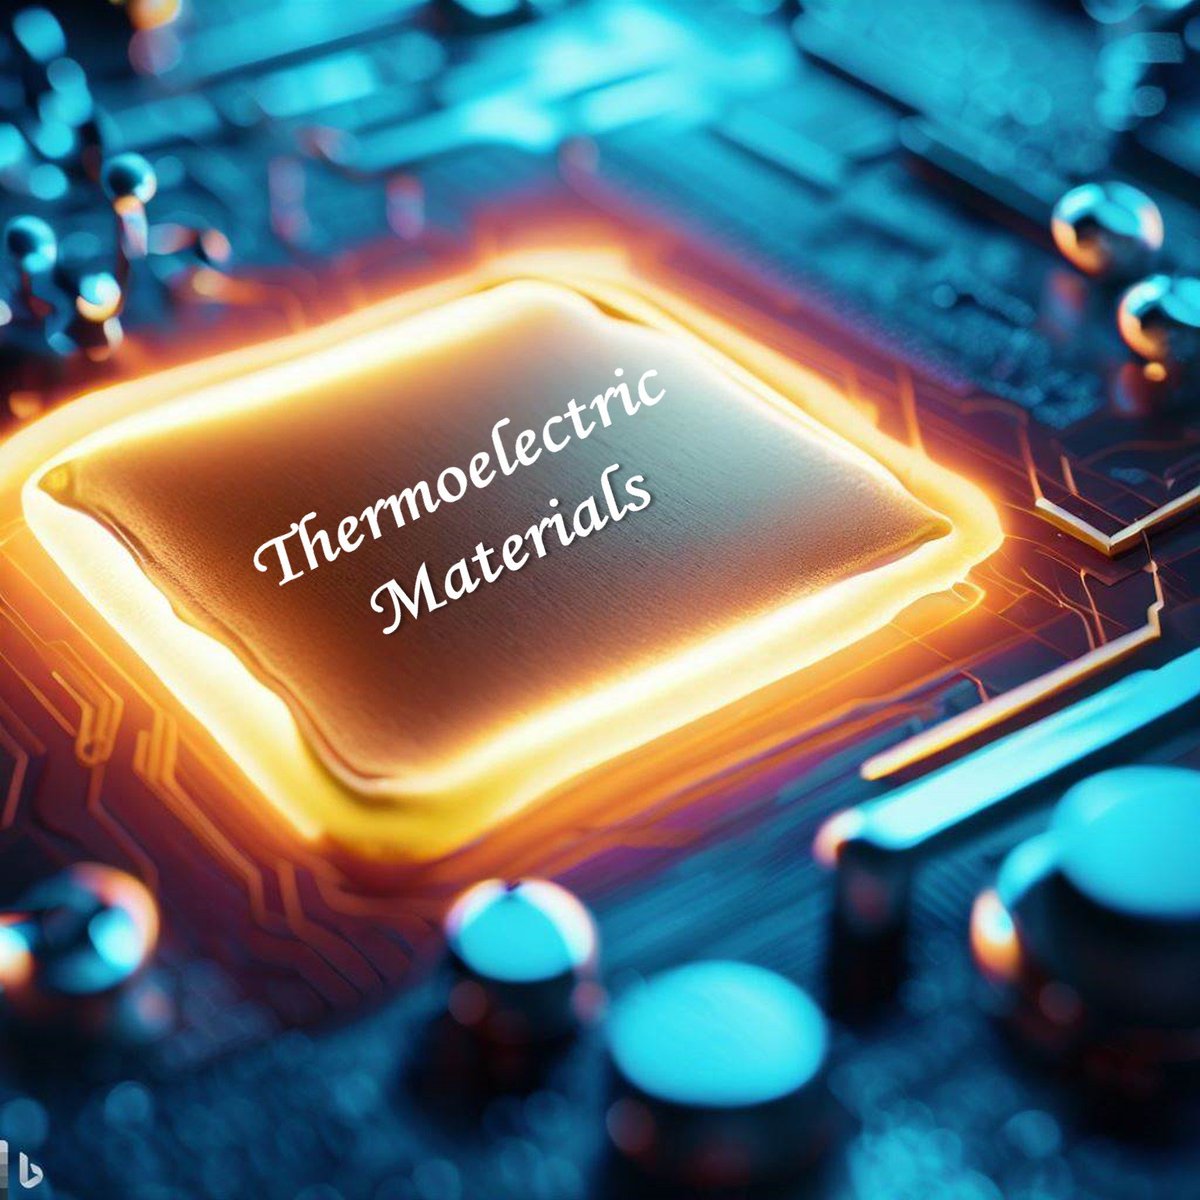 📢 Editor’s Choice Papers Recommendation 📌 Advancing #Thermoelectric Materials: A Comprehensive Review Exploring the Significance of One-Dimensional Nano Structuring By @Anuroyrag et al. from @UniofExeterESI 🔗 Read the full #openaccess publication:  mdpi.com/2079-4991/13/1…